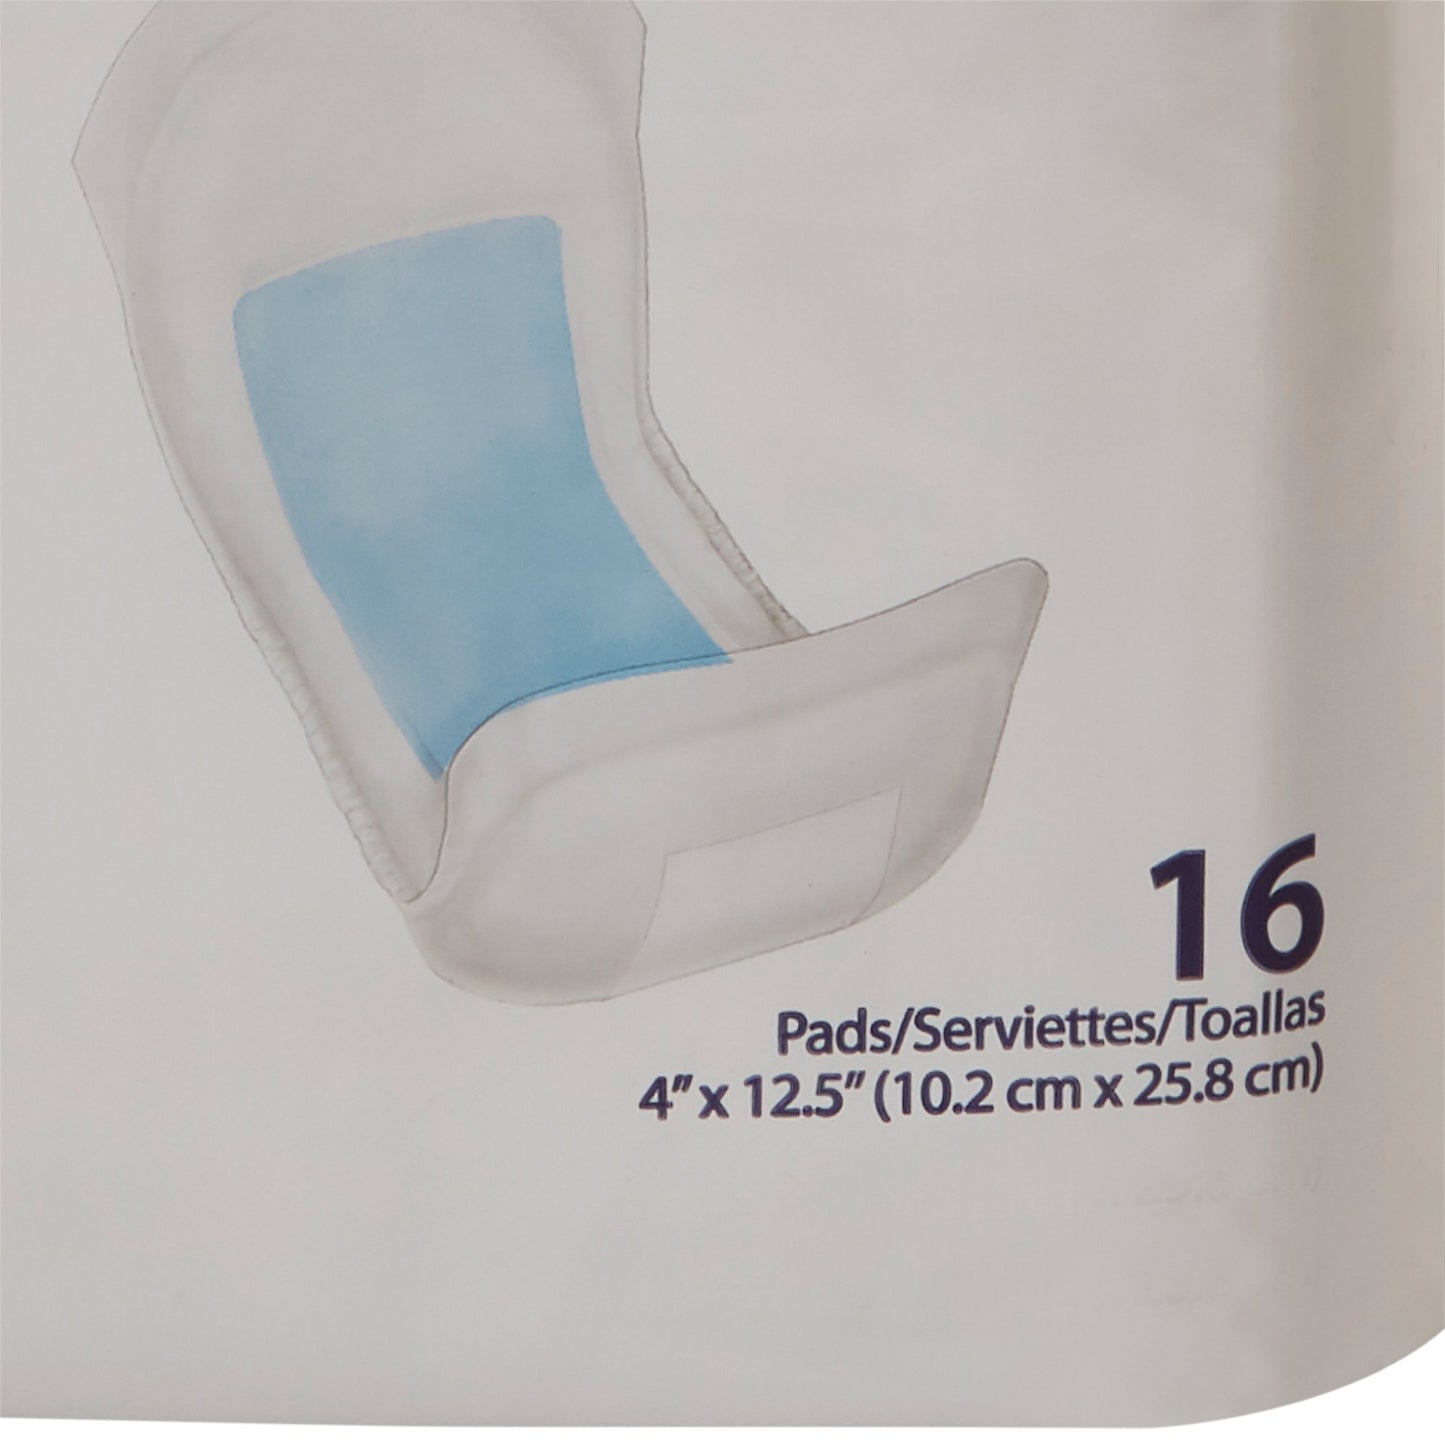 Sure Care Bladder Control Pads, Heavy Absorbency, Adult, Unisex, Disposable, 4 X 12-1/2 Inch, 16 ct